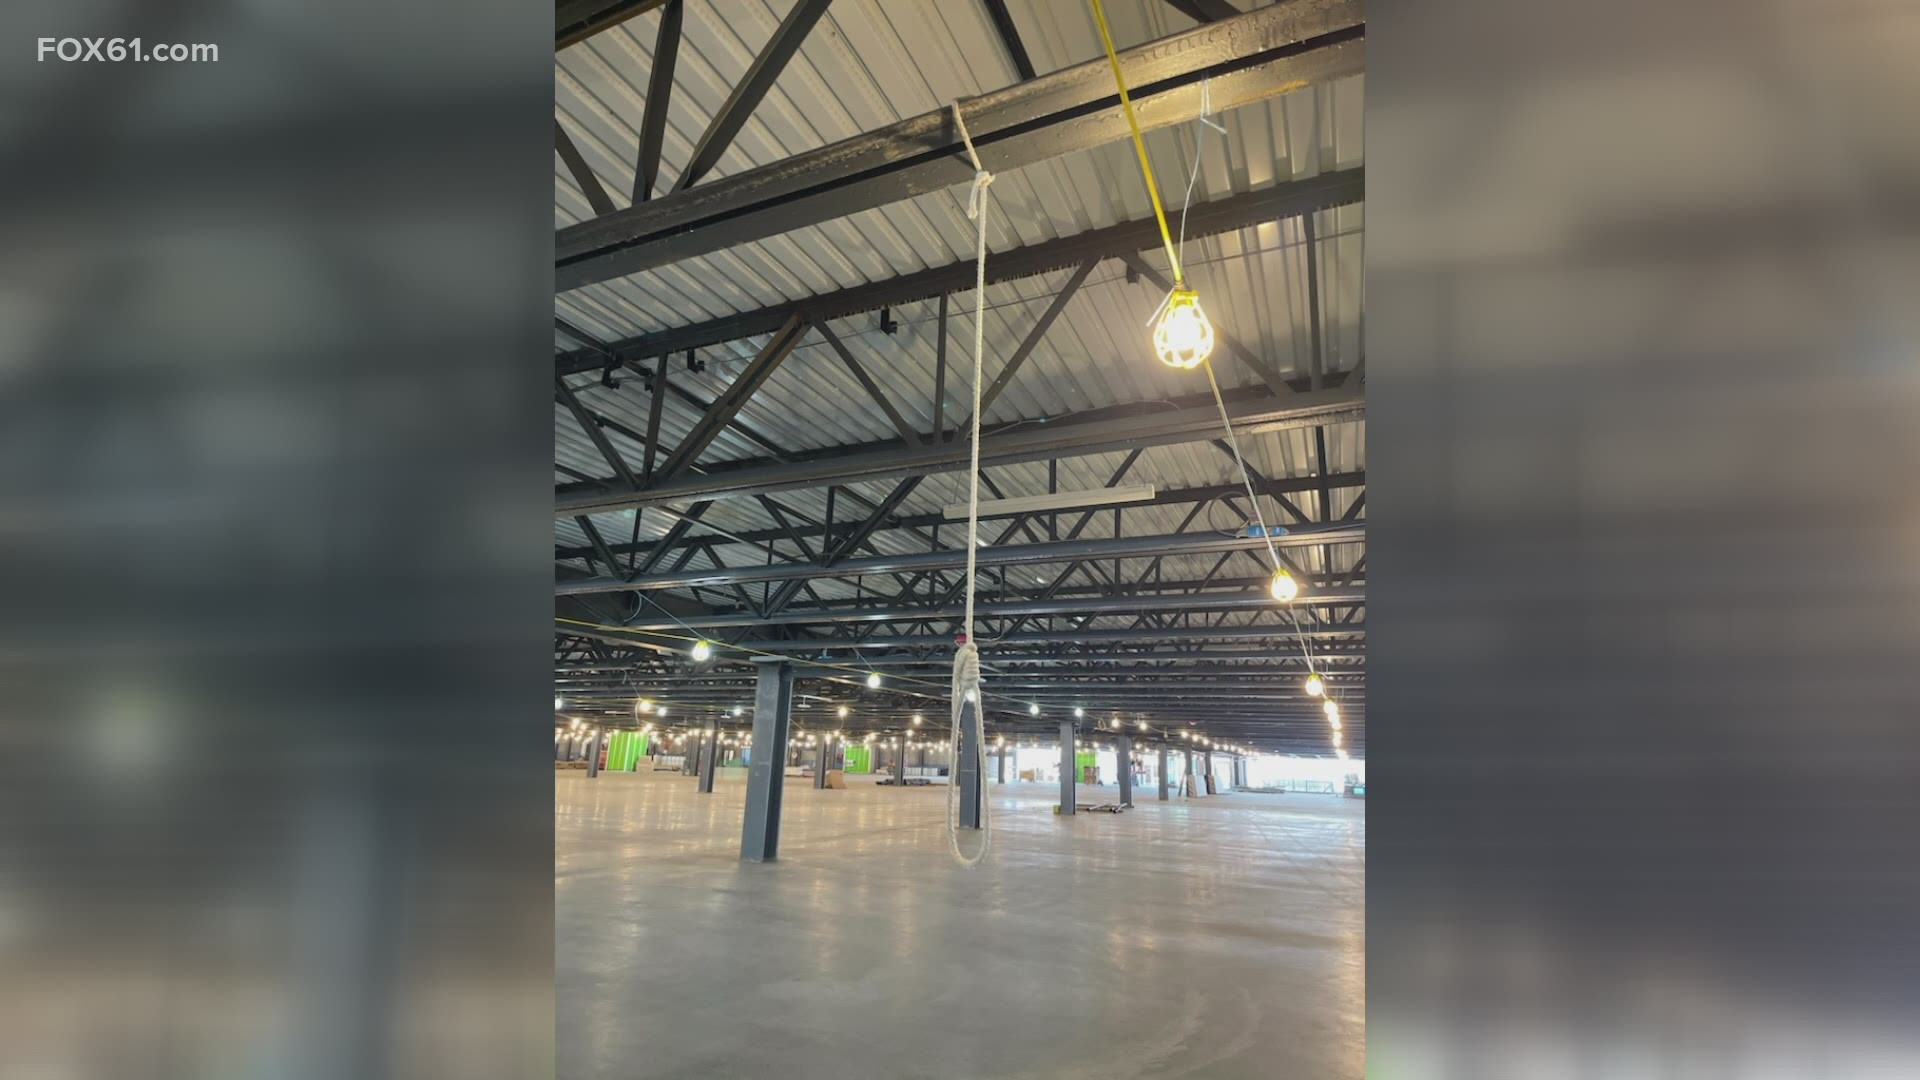 On April 27, the incident was first reported by the contractor on-site to officers. A few days later, police found five ropes that could be interpreted as nooses.